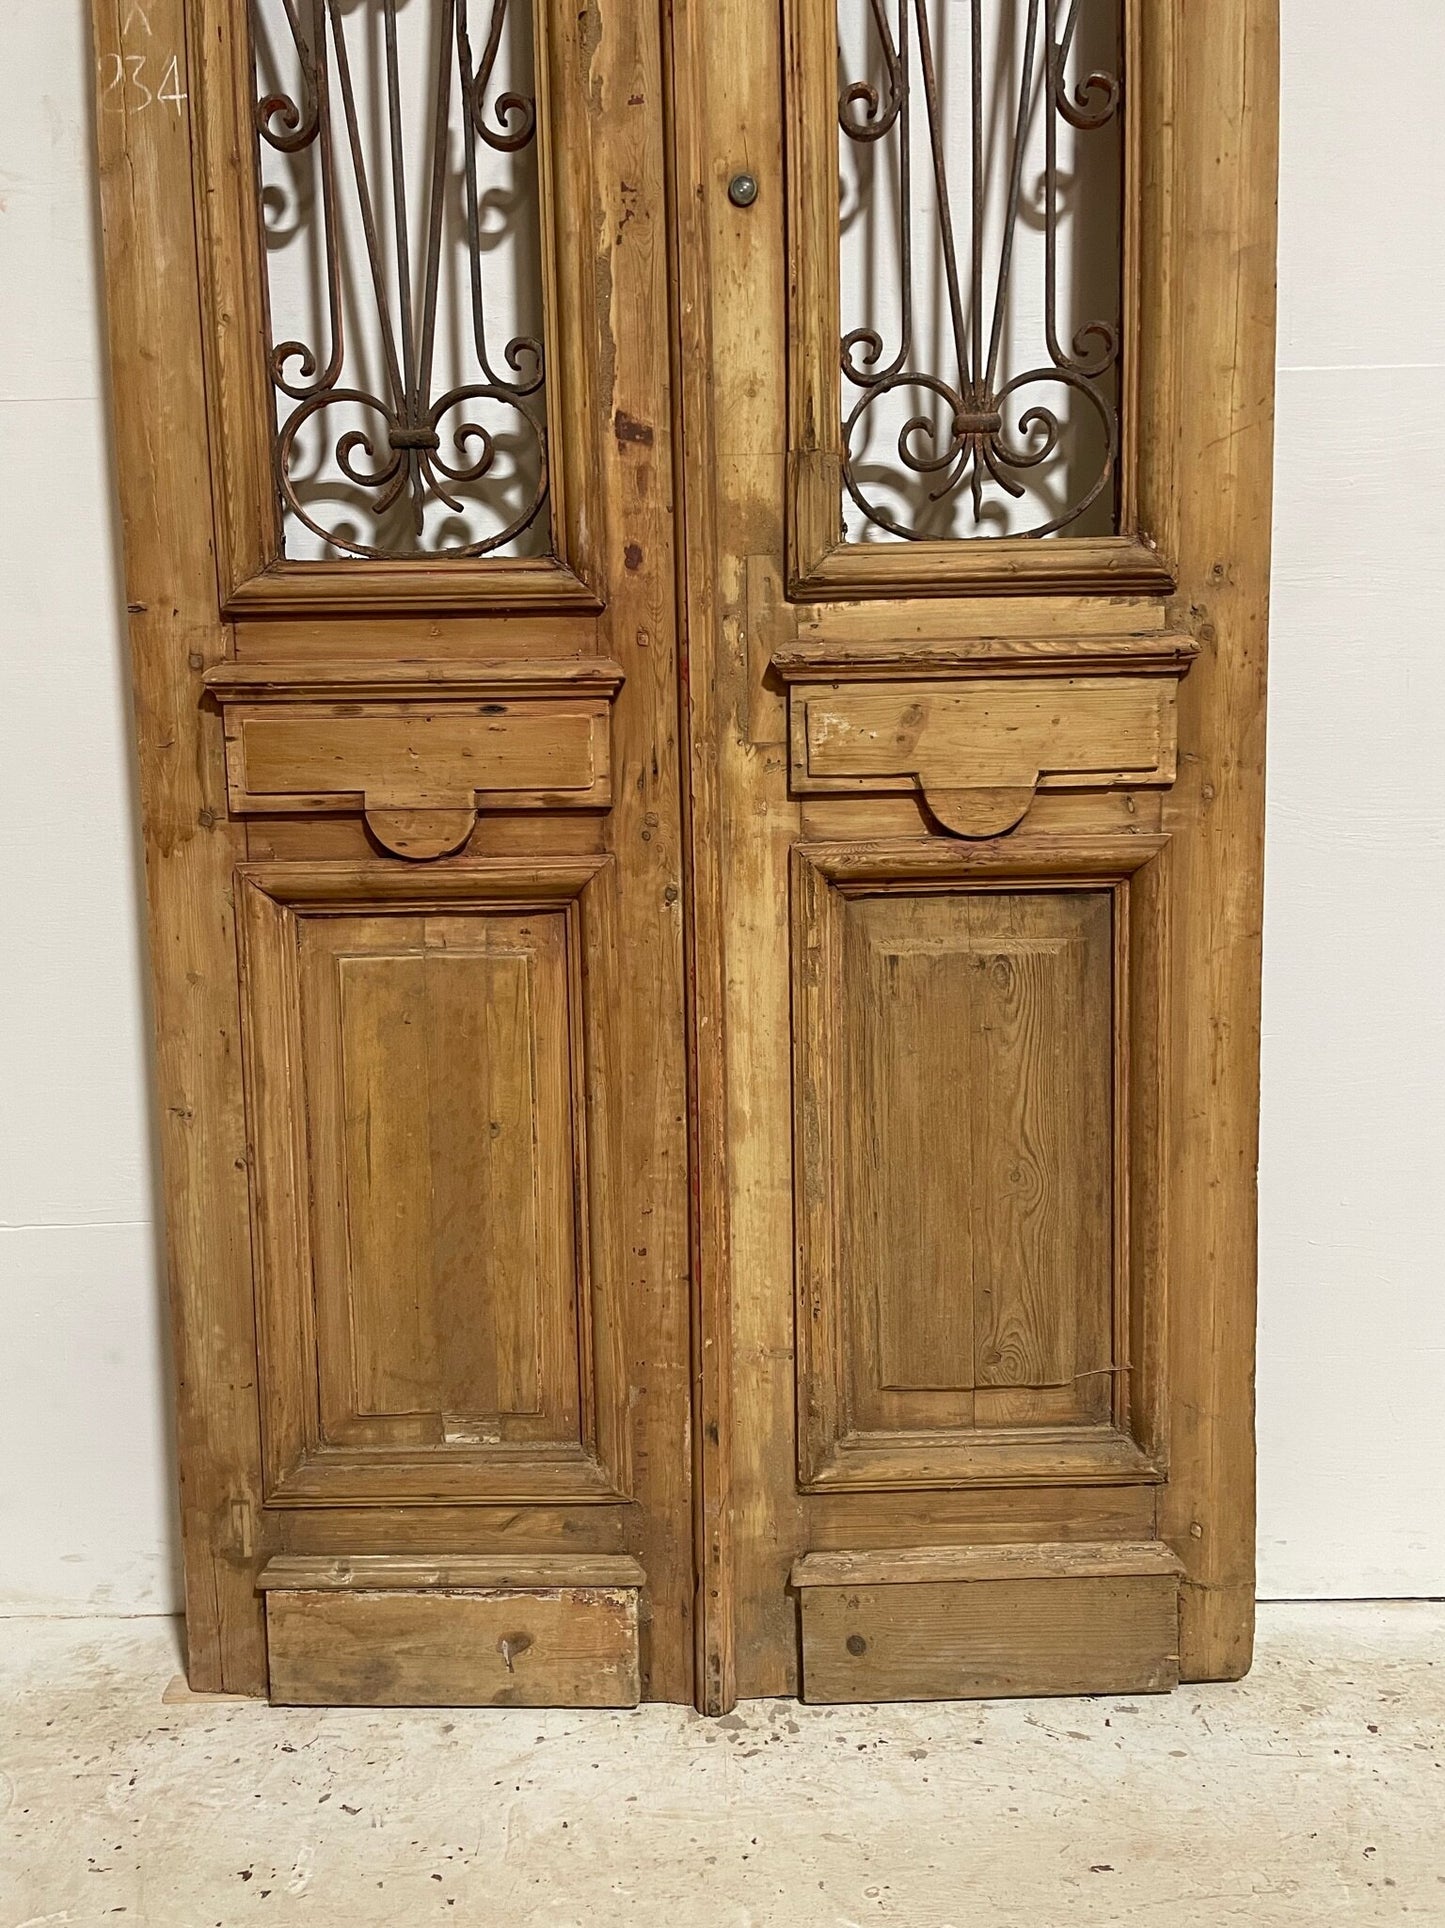 Antique French door (92.5x40) with metal E15